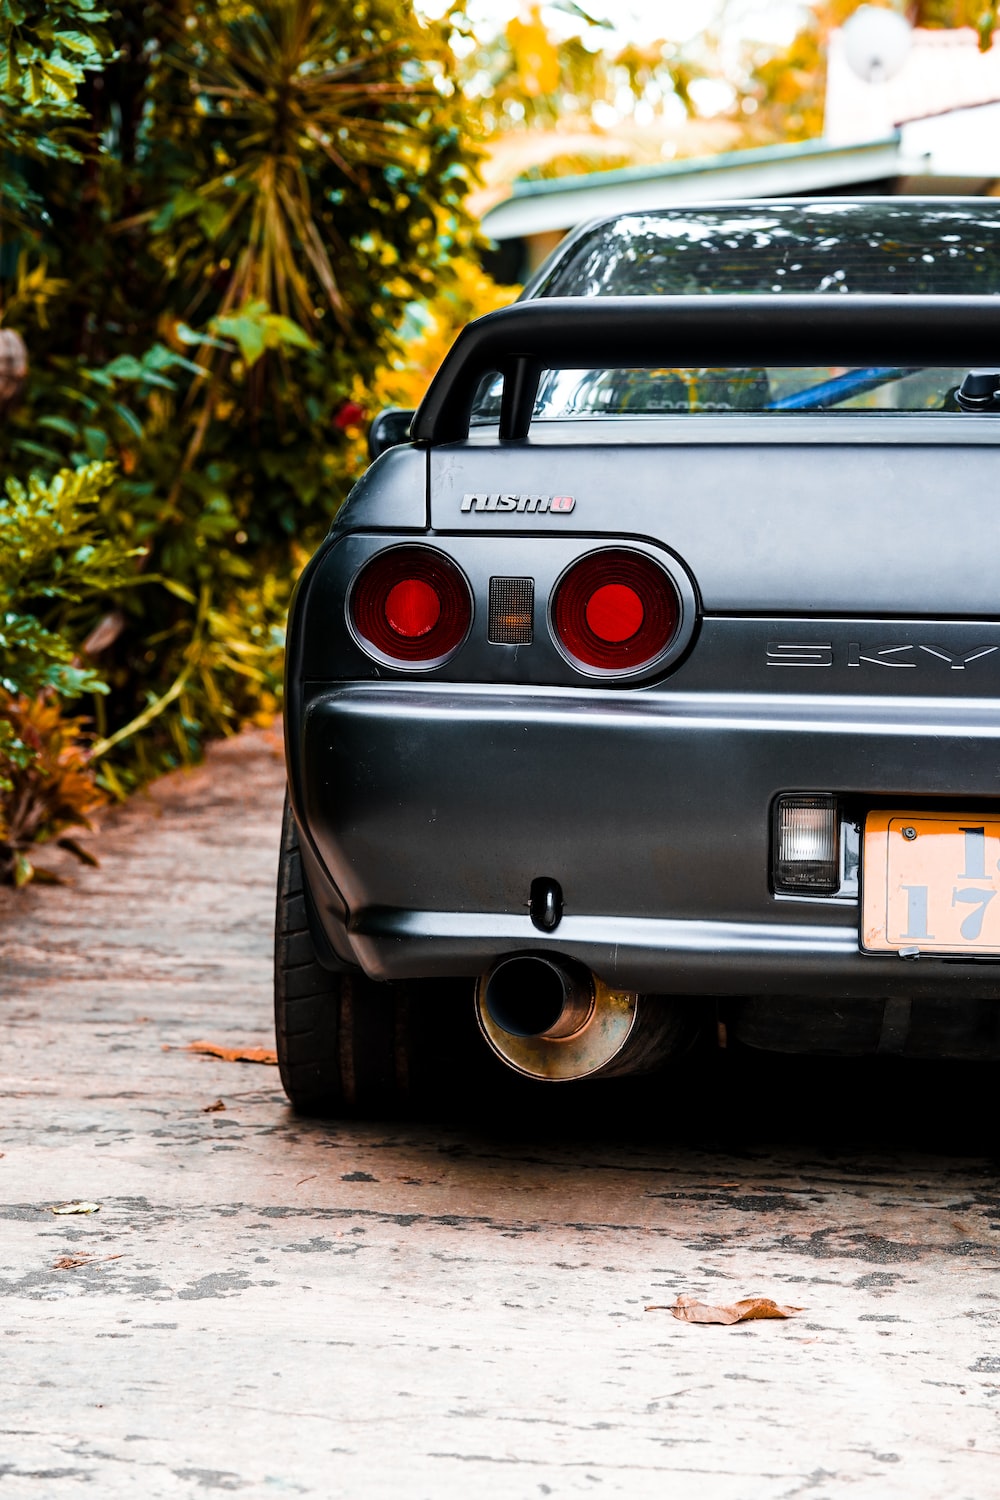 Gtr R32 Picture. Download Free Image